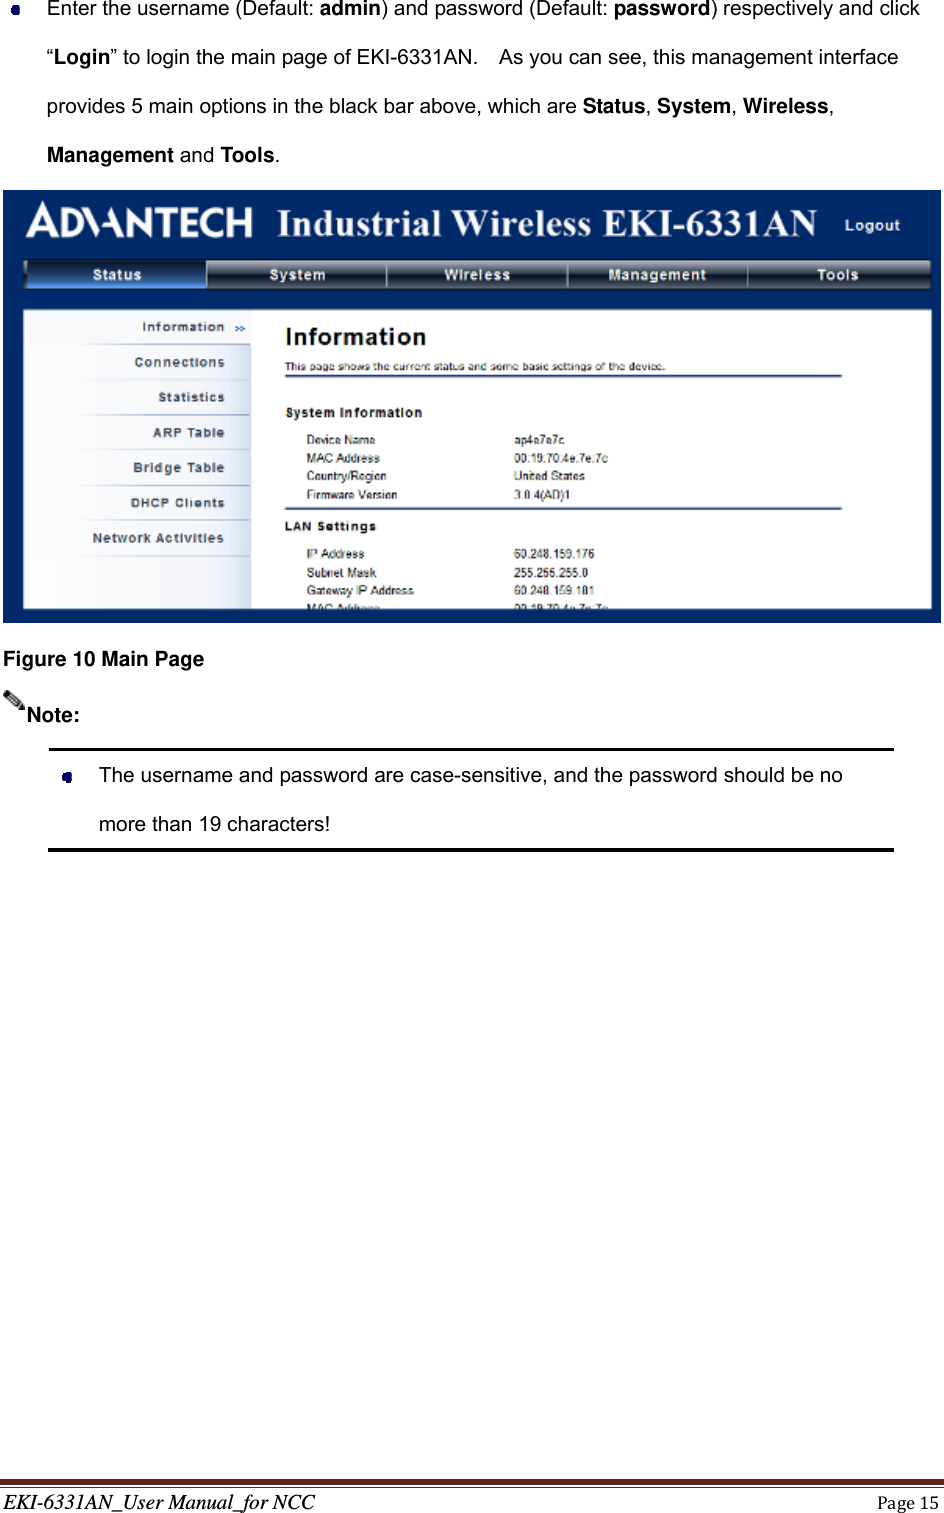 EKI-6331AN_User Manual_for NCCPage15  Enter the username (Default: admin) and password (Default: password) respectively and click “Login” to login the main page of EKI-6331AN.    As you can see, this management interface provides 5 main options in the black bar above, which are Status, System, Wireless, Management and Tools.  Figure 10 Main Page    The username and password are case-sensitive, and the password should be no more than 19 characters! Note: 